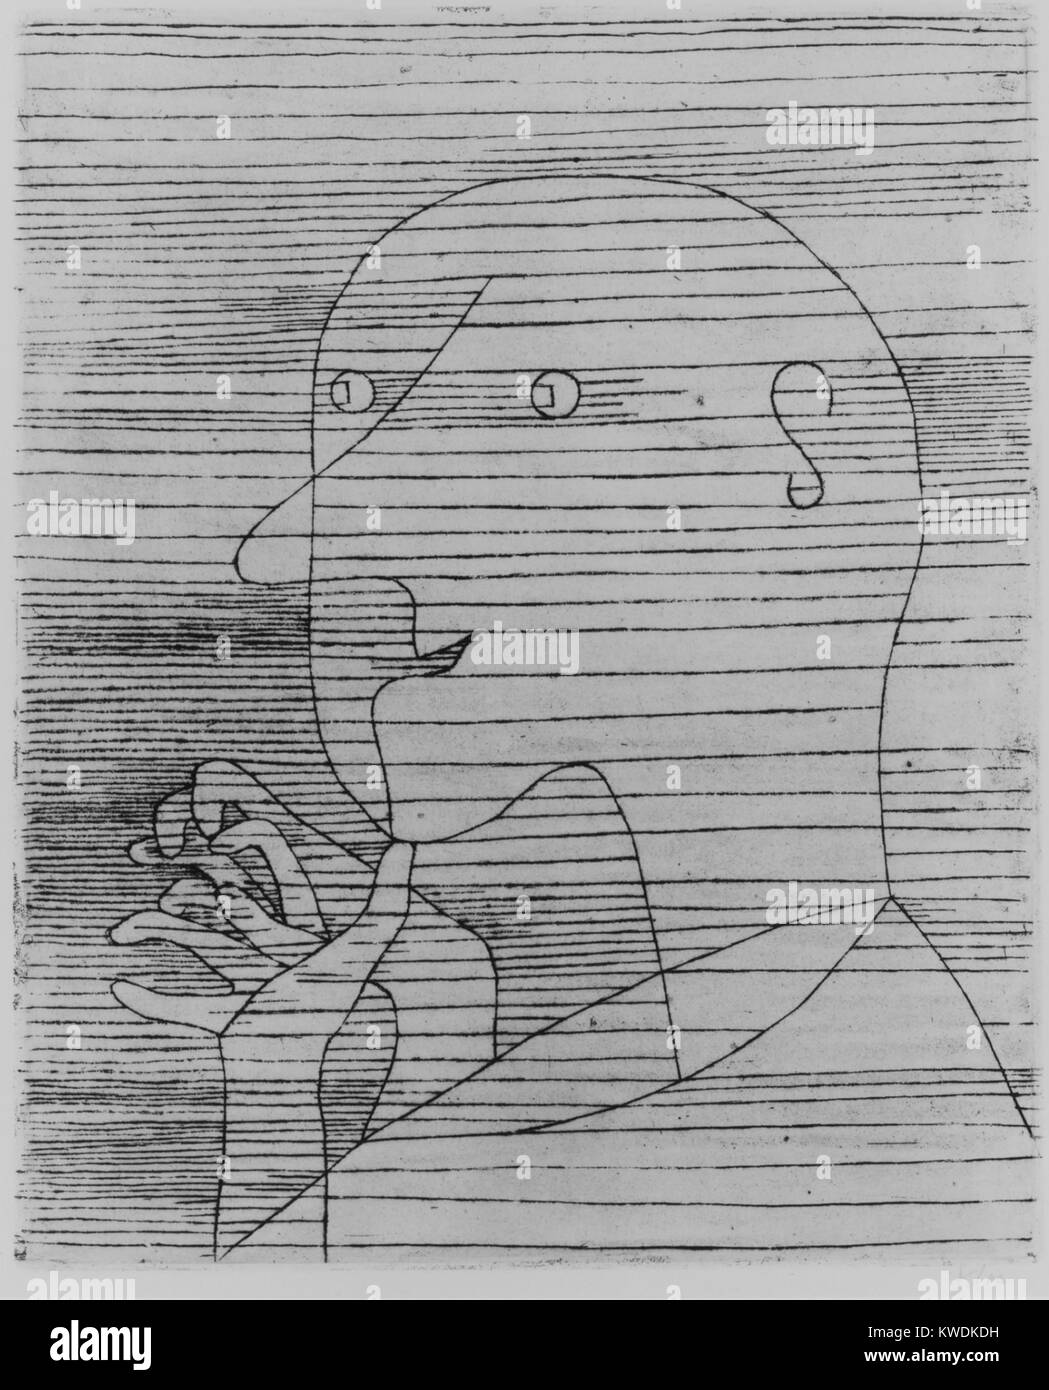 OLD MAN COUNTING, by Paul Klee, 1929, Swiss print, etching. Klees titles are often important to appreciate with his images. This one leads to meditation of aging and mortality (BSLOC_2017_7_25) Stock Photo